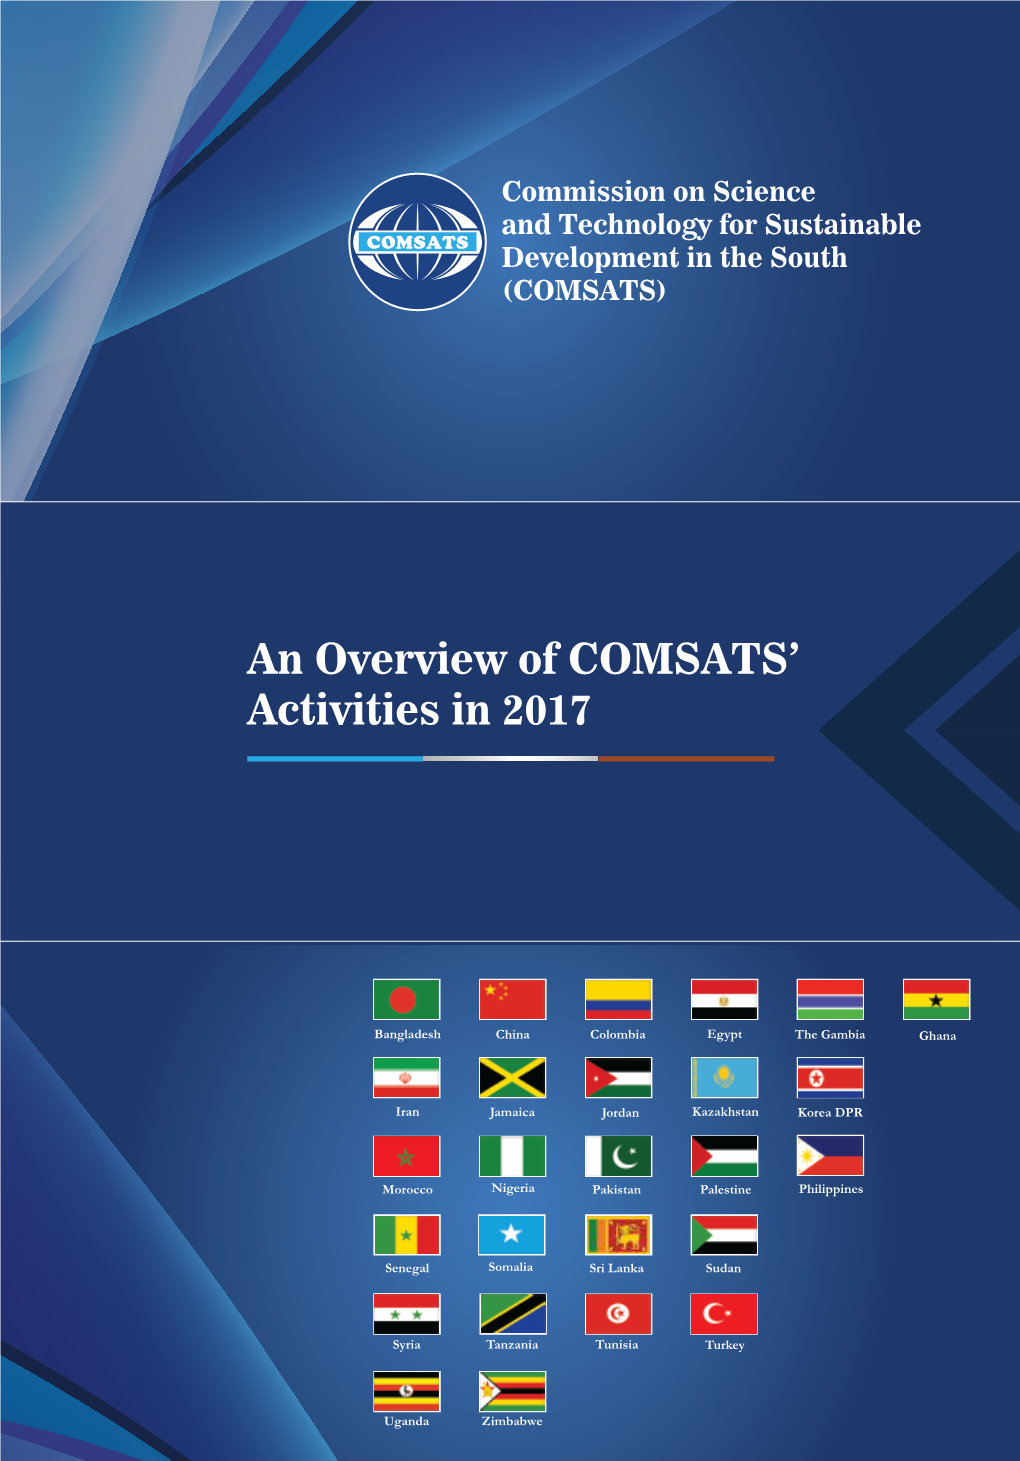 An Overview of COMSATS' Activities in 2017